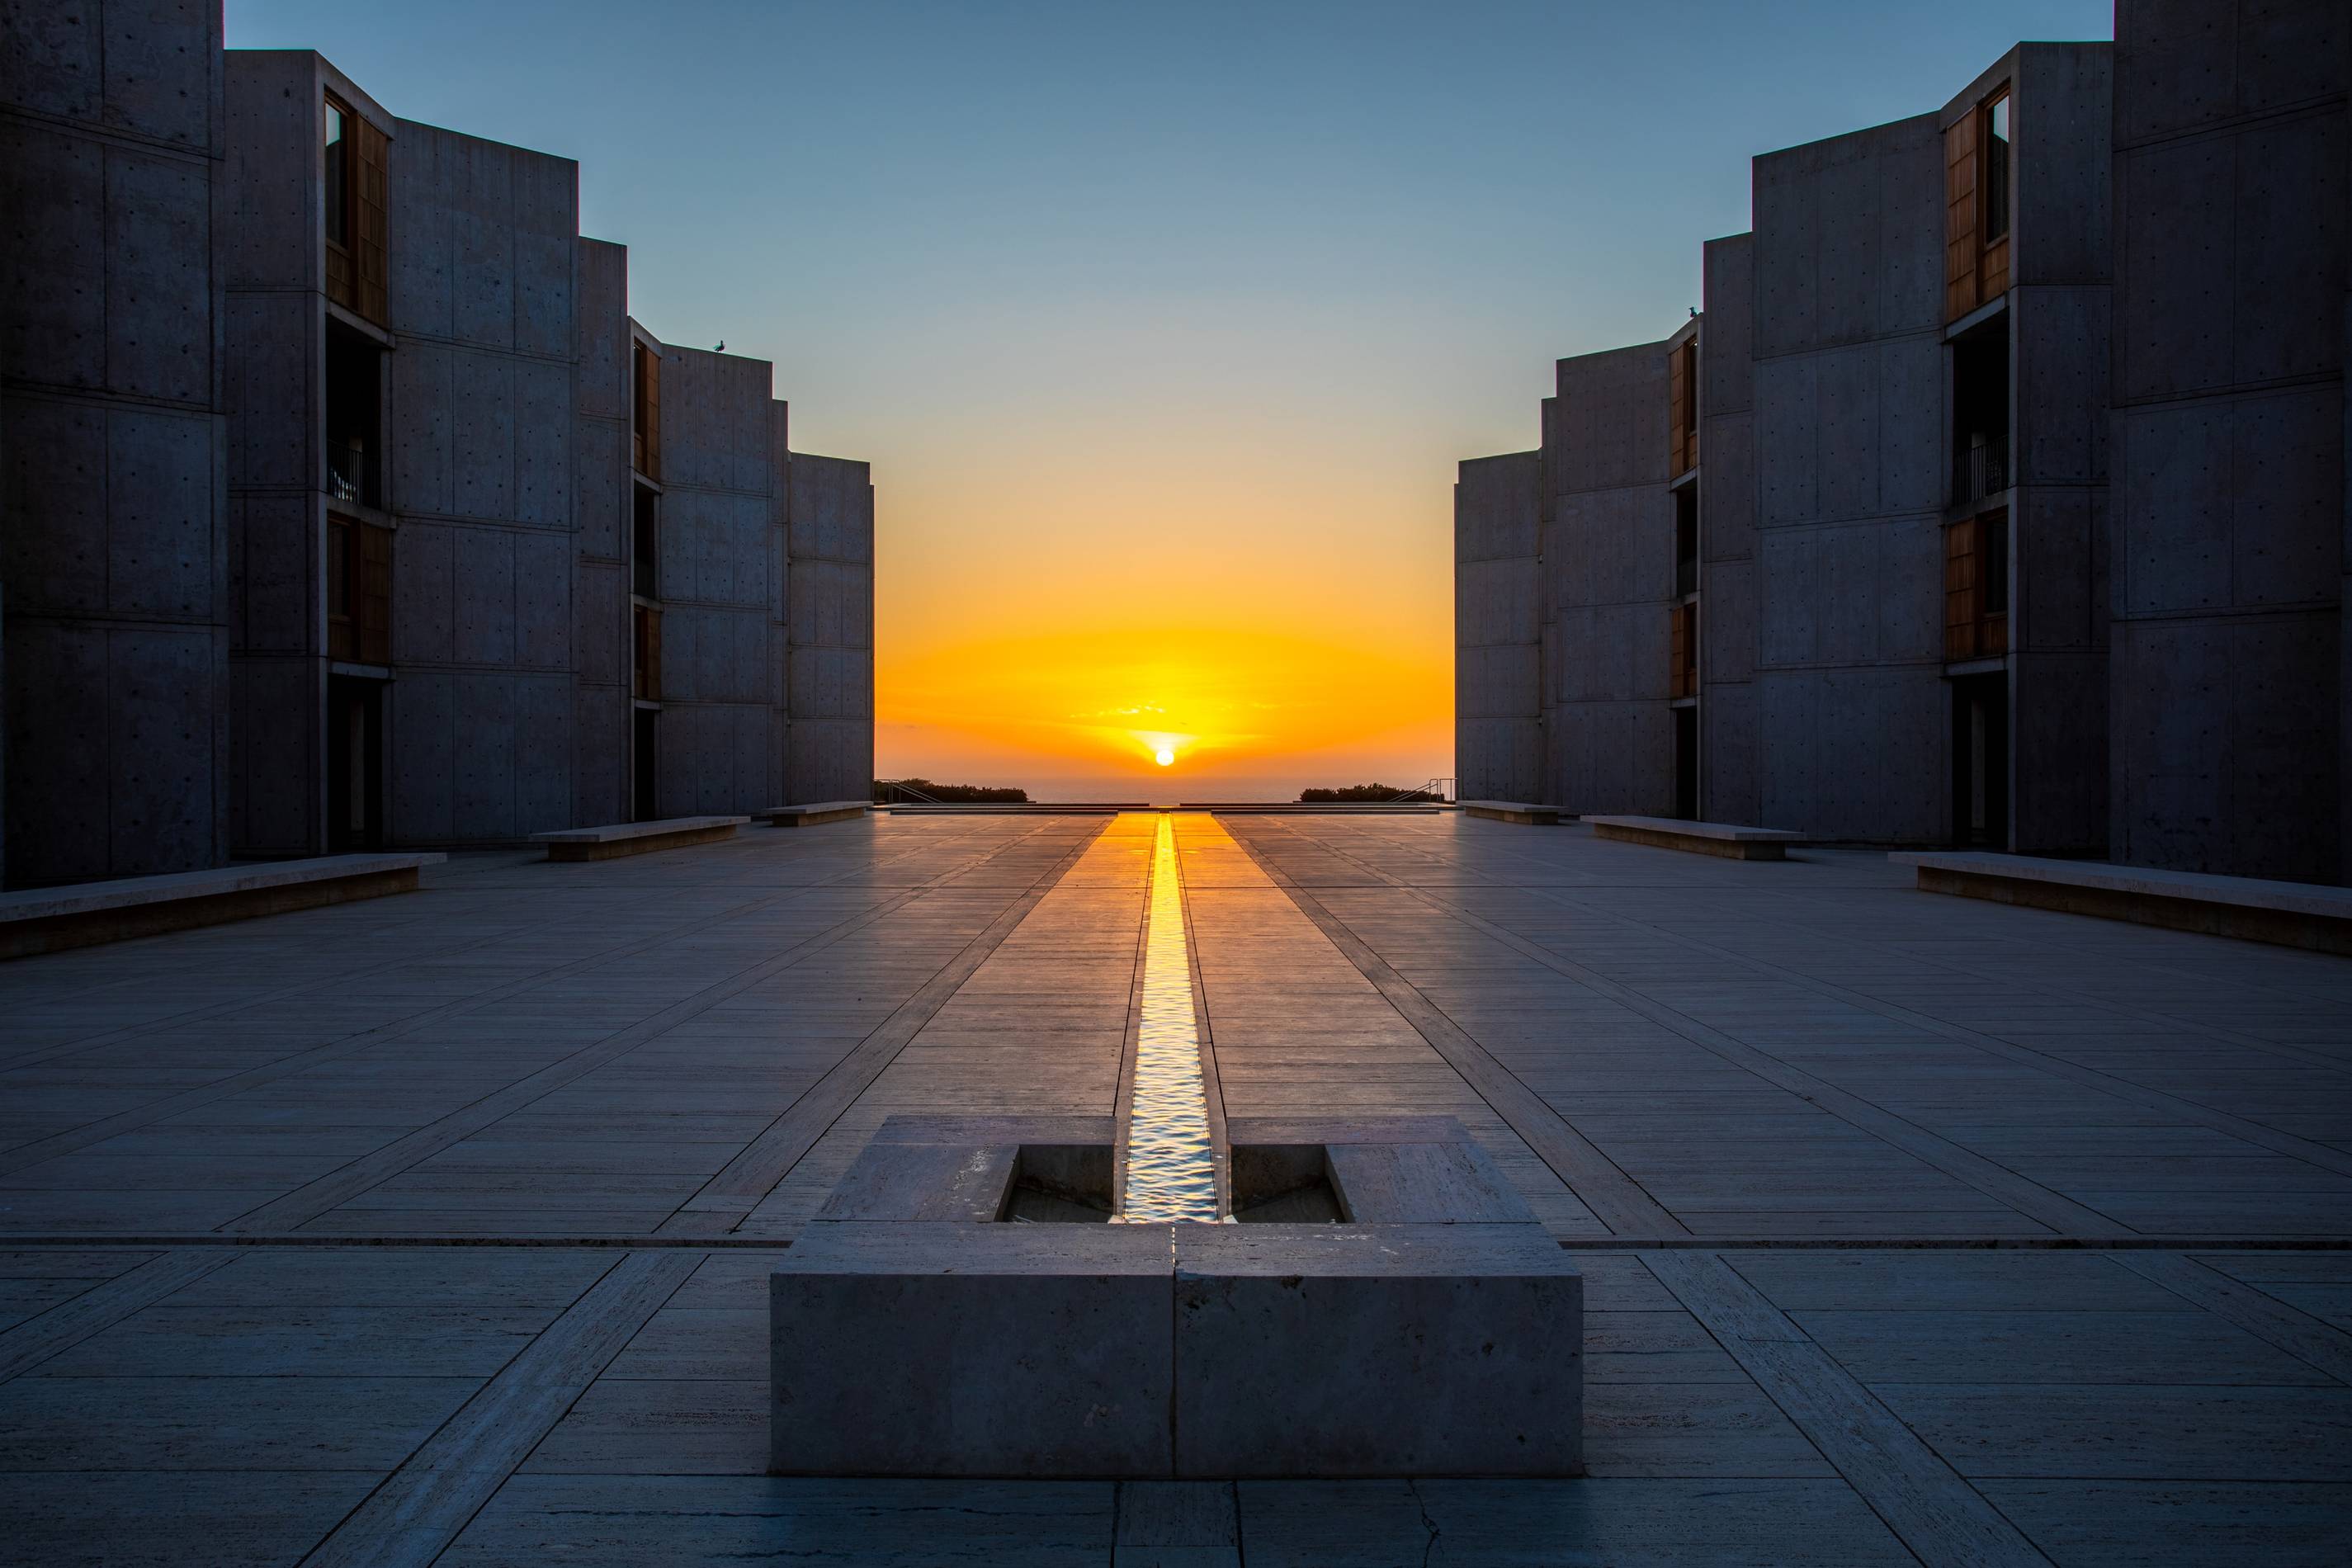 Louis Vuitton Announces Cruise Show To Be Held At The Salk Institute